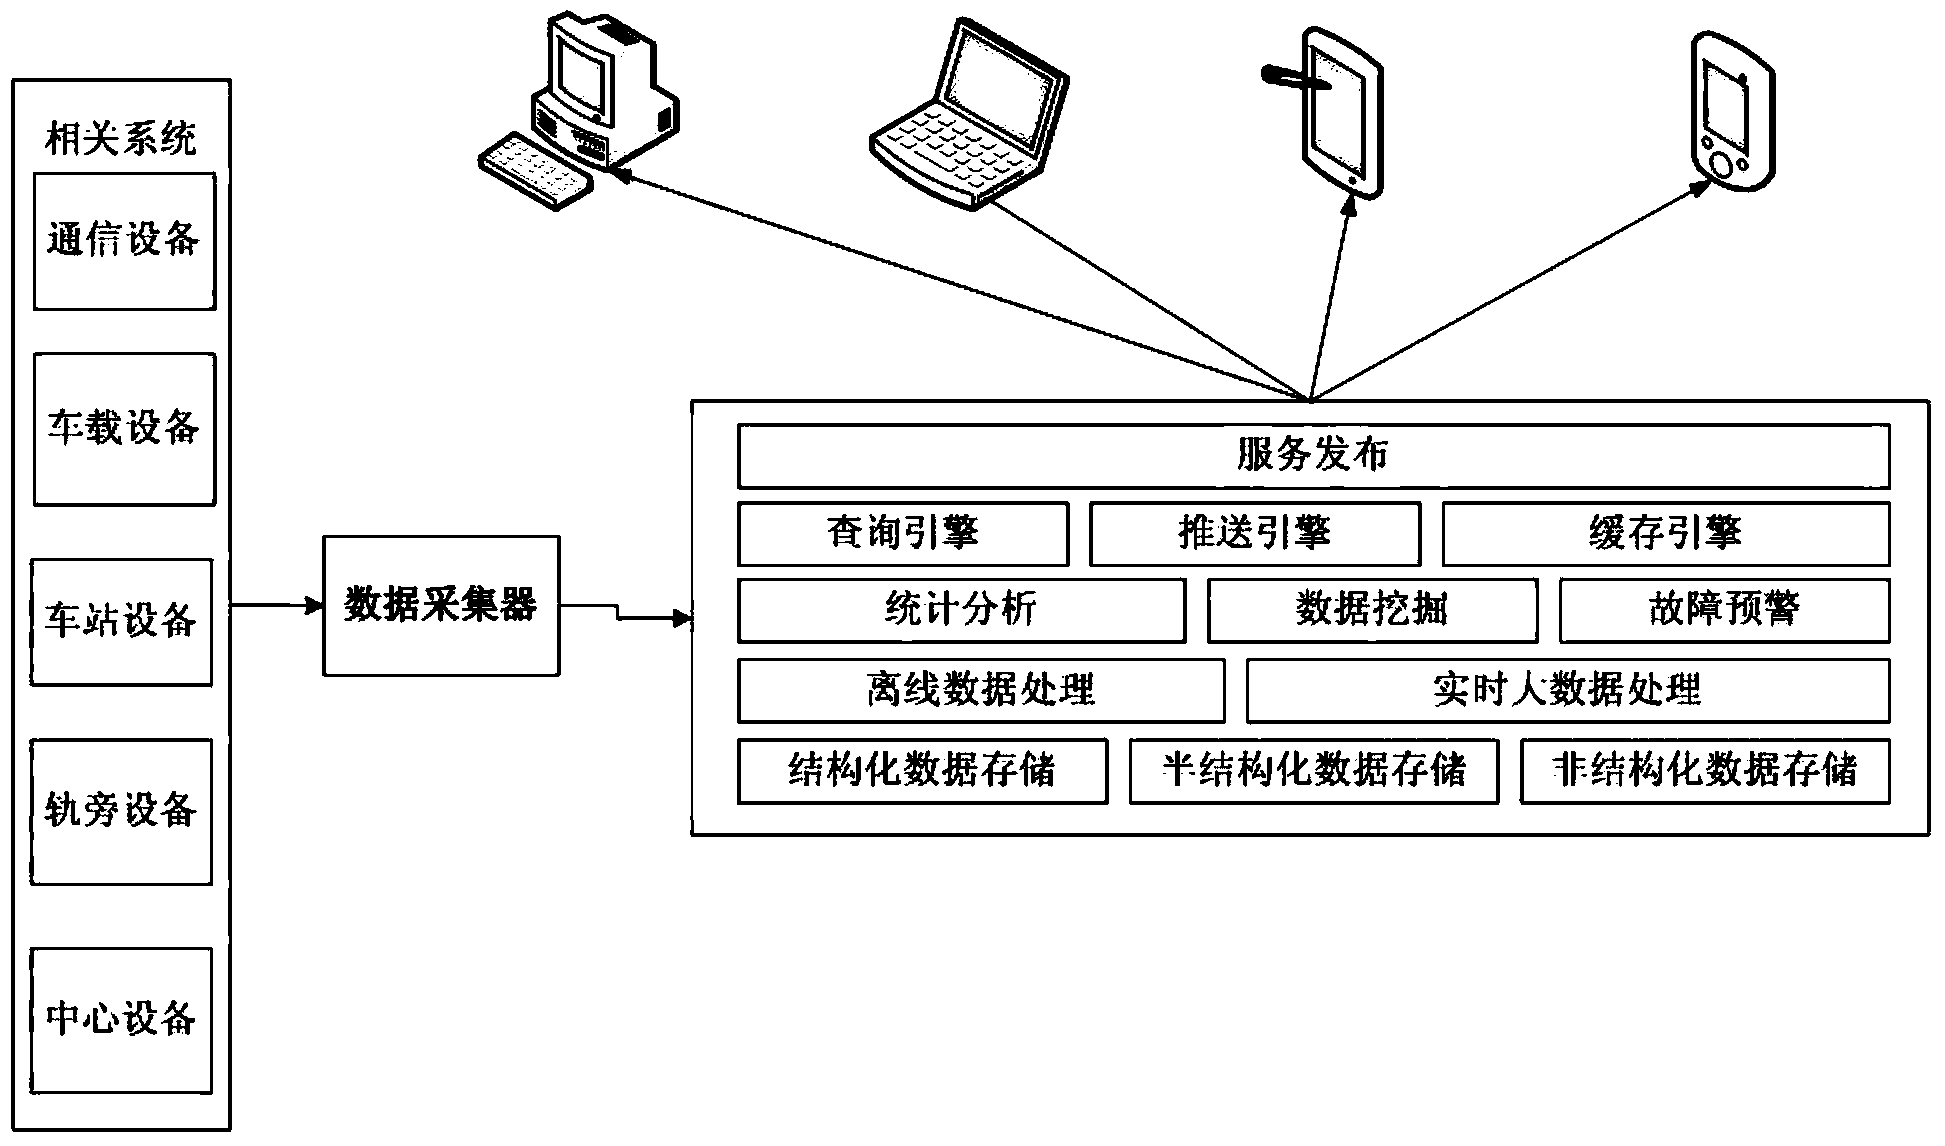 Rail traffic signal comprehensive operation and maintenance method and system based on cloud computing